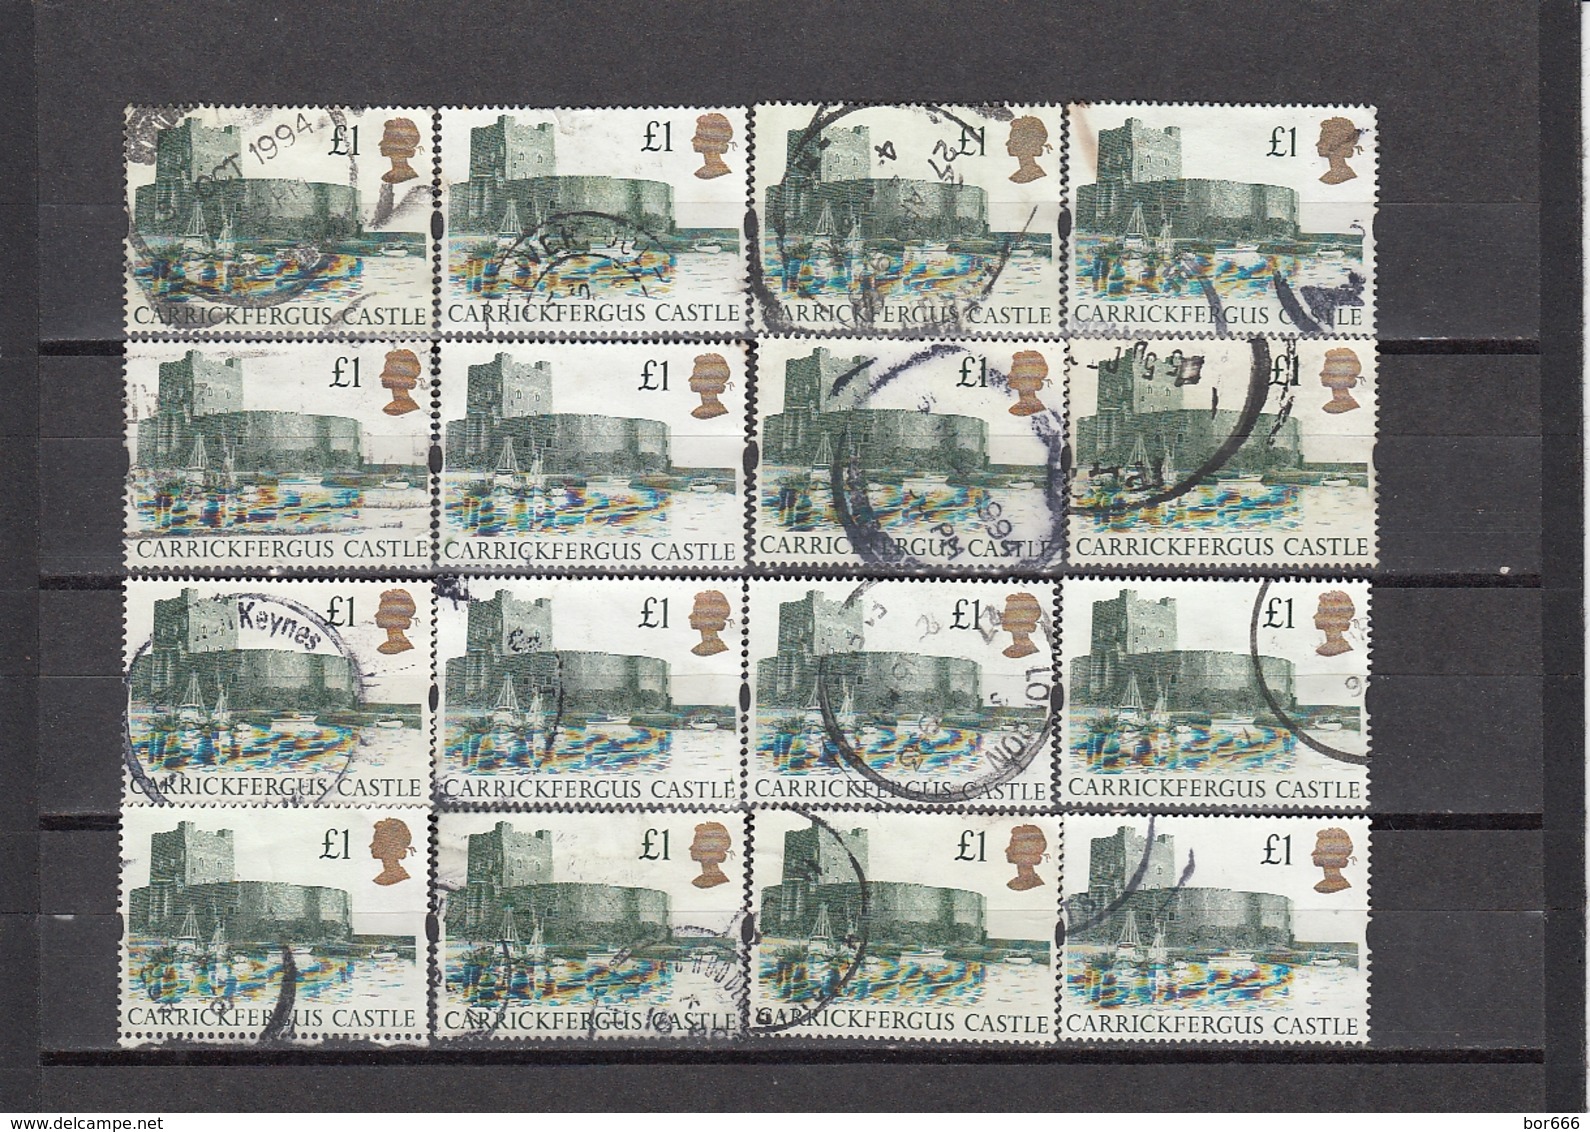 GOOD SELECTION GB CASTLES 1992/94 - Used Stamps